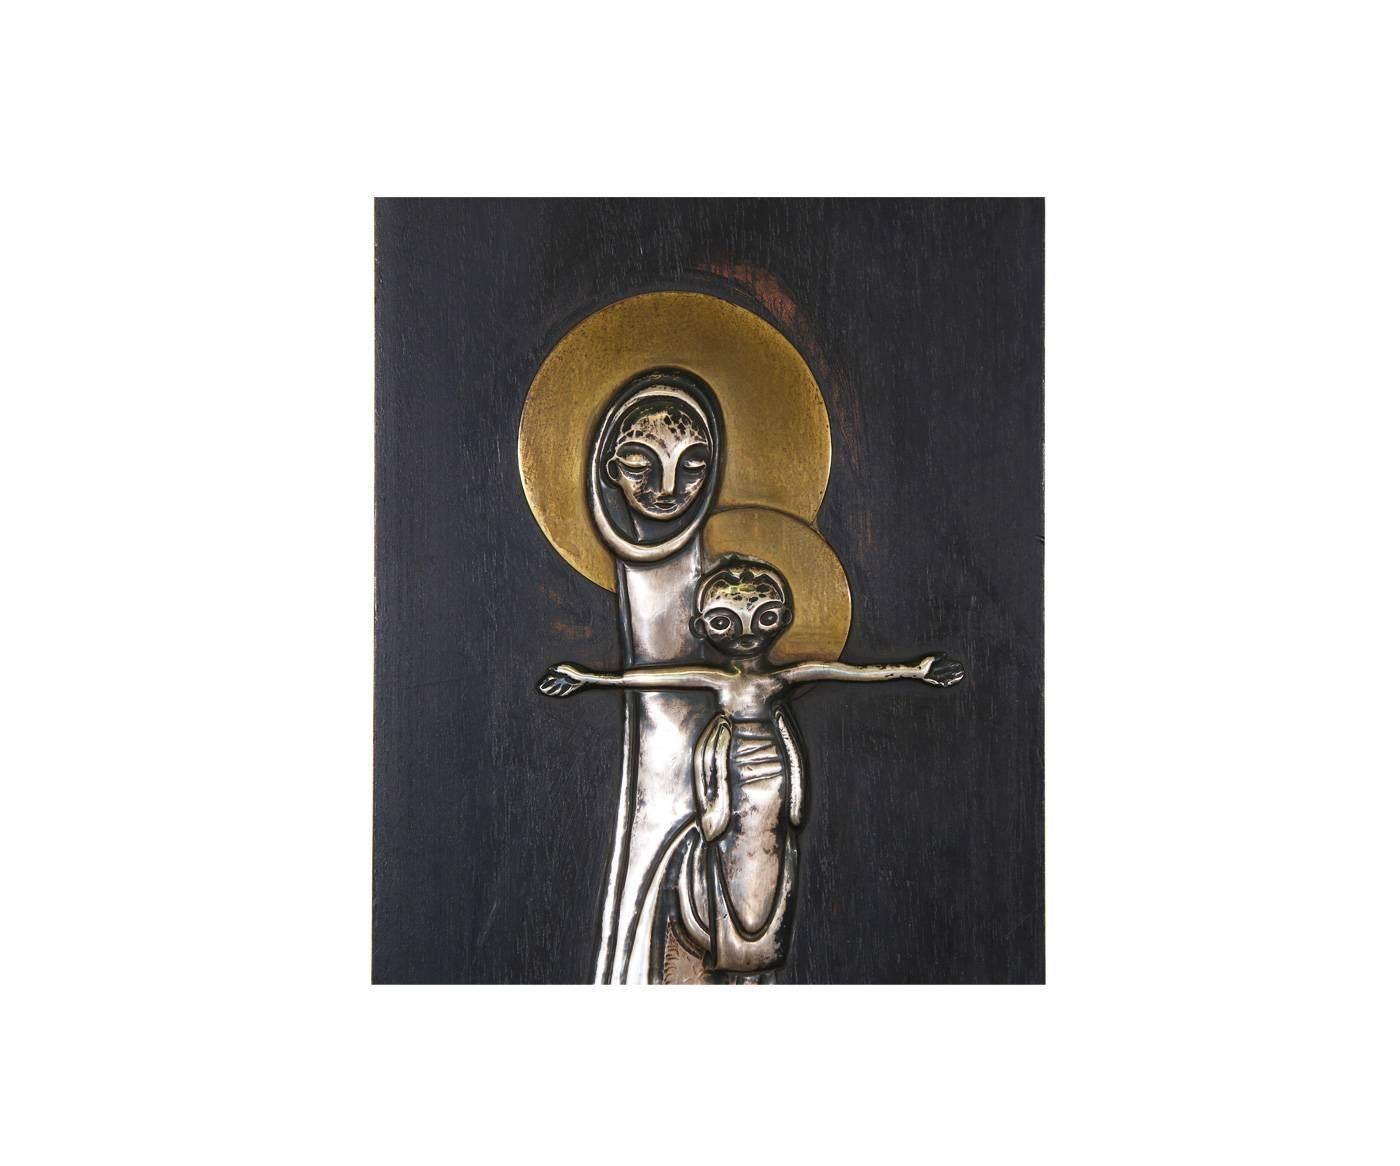 Designer: Benedictine Monks of Cuernavaca
Manufacturer: Talleres Monasticos
Period/Style: Mexican Modernism
Country: Mexico
Date: 1960’s

Dimensions: 18″H x 6″W
Materials: Brass, Sterling Silver, Wood
Condition: Wear consistent with